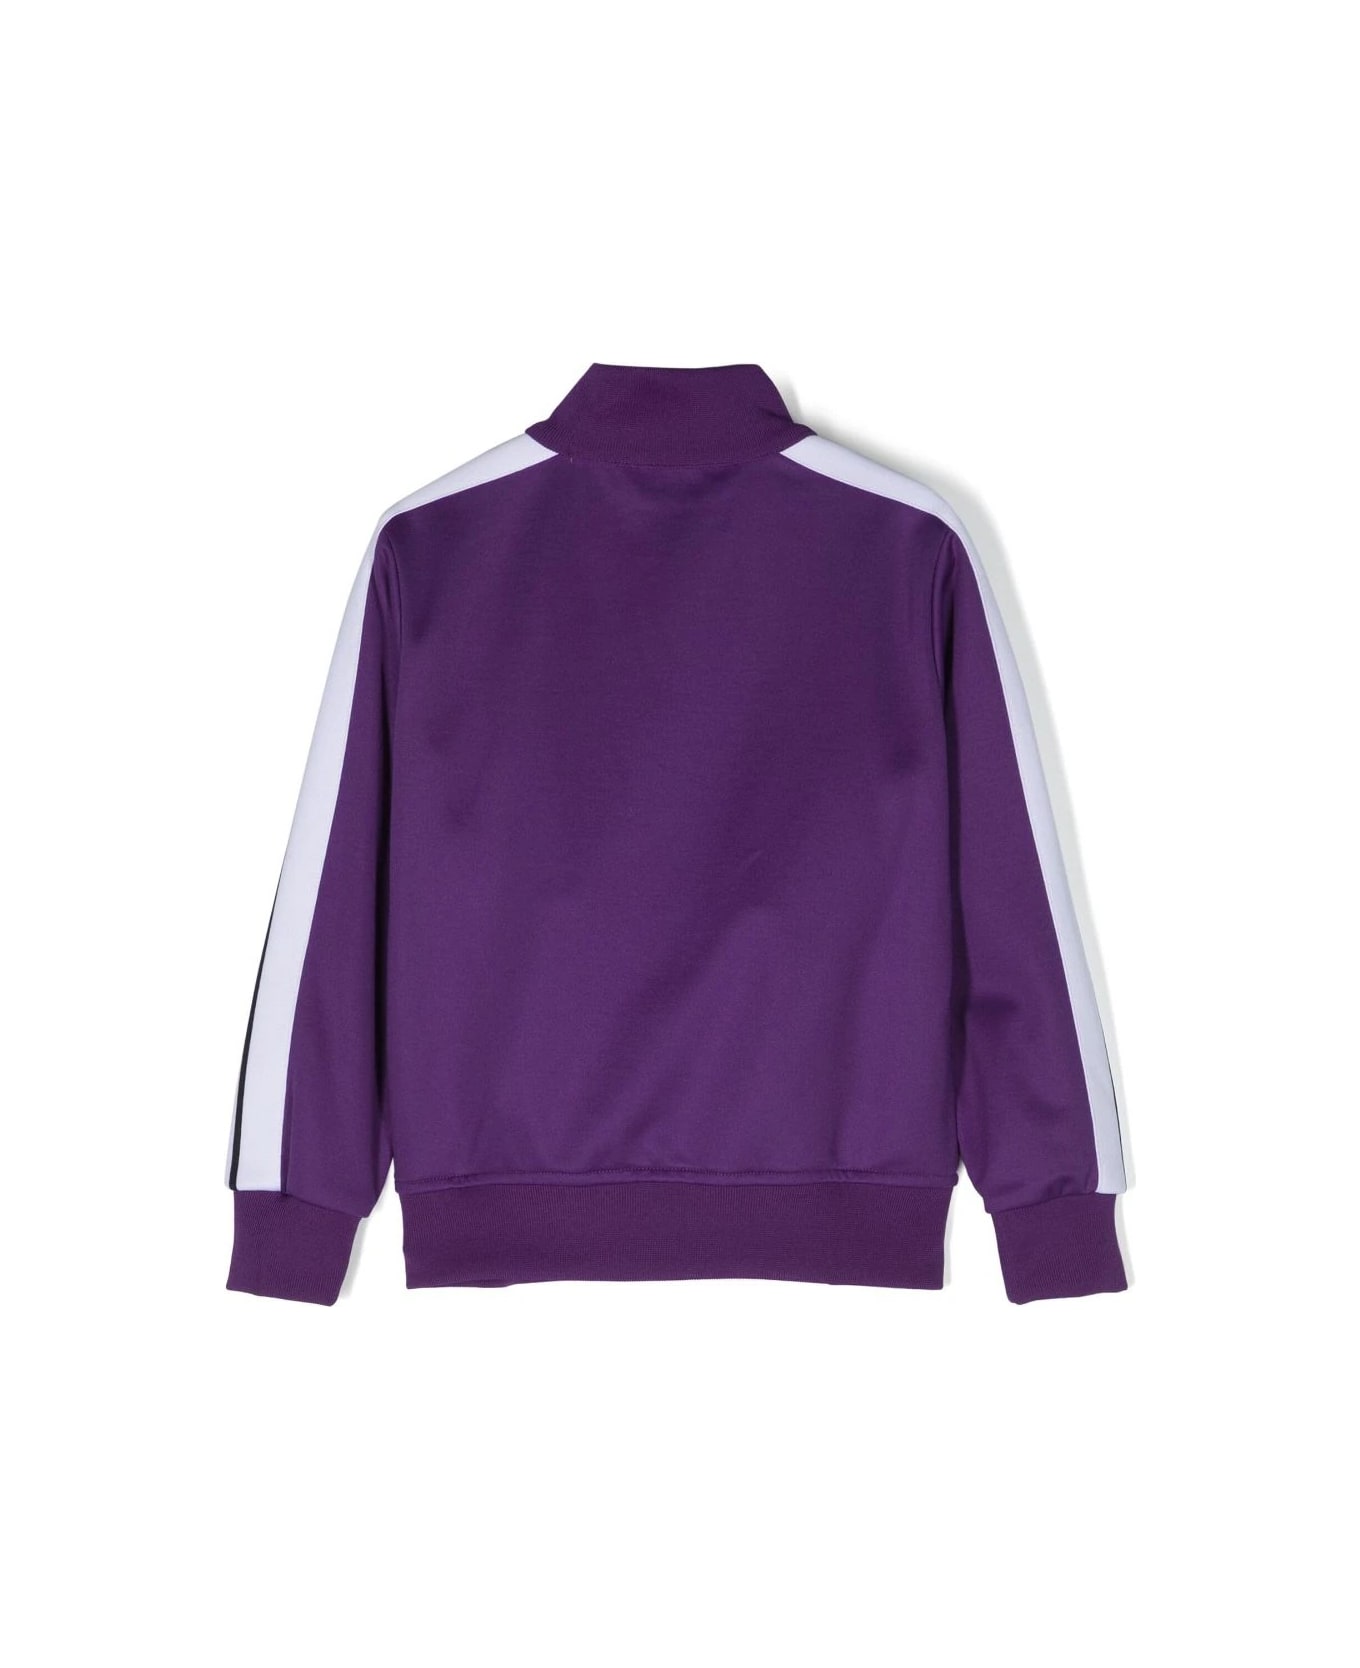 Palm Angels Purple Track Jacket With Zip And Logo - Purple